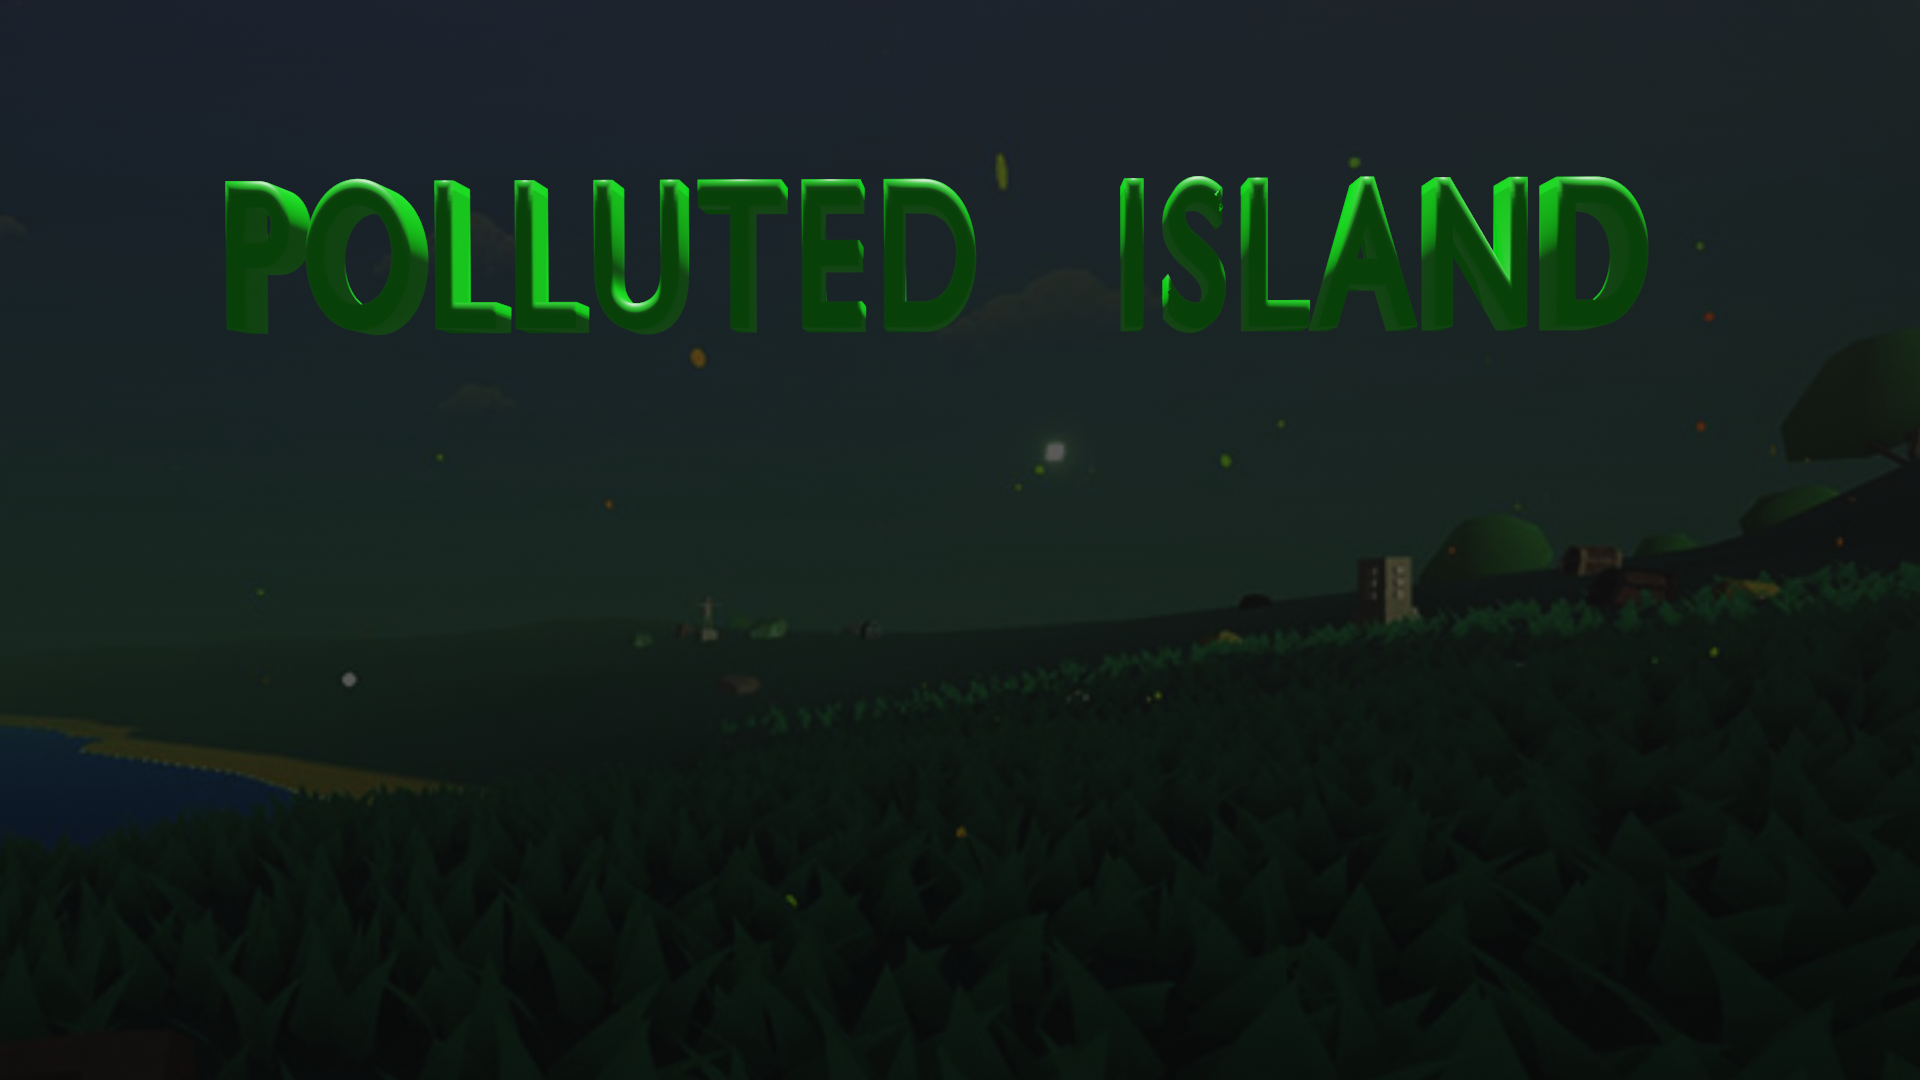 Polluted Island